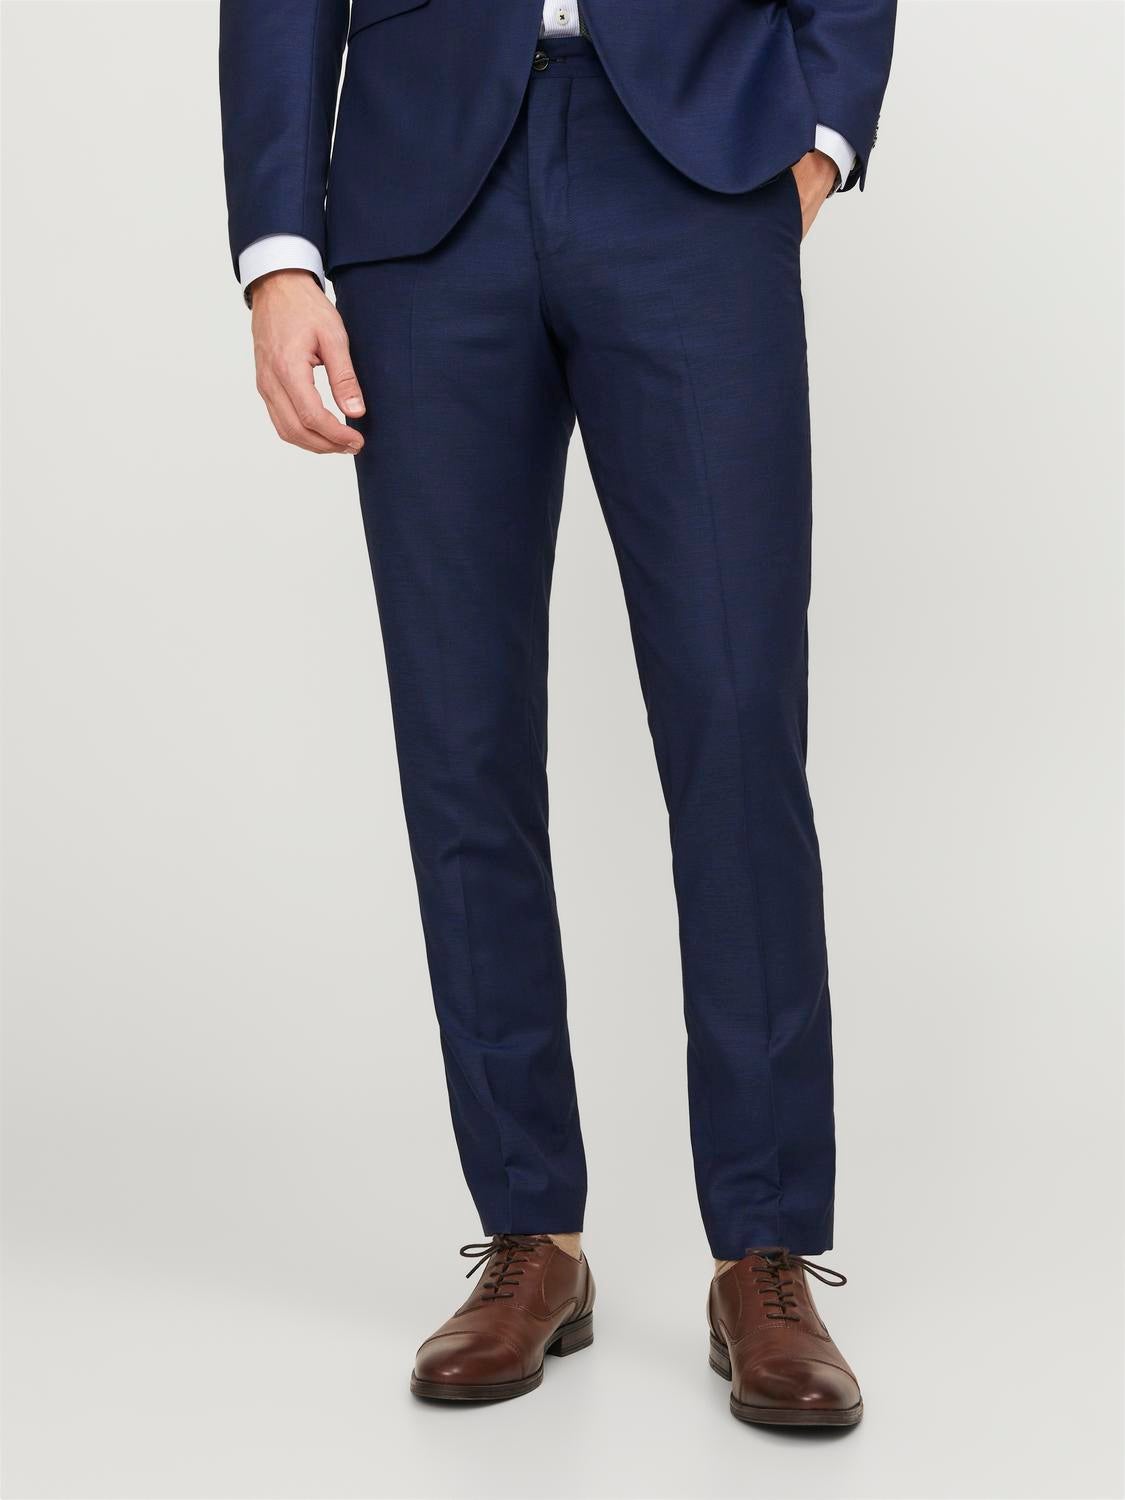 Silver Solid Full Length Formal Men Ultra Slim Fit Trousers - Selling Fast  at Pantaloons.com